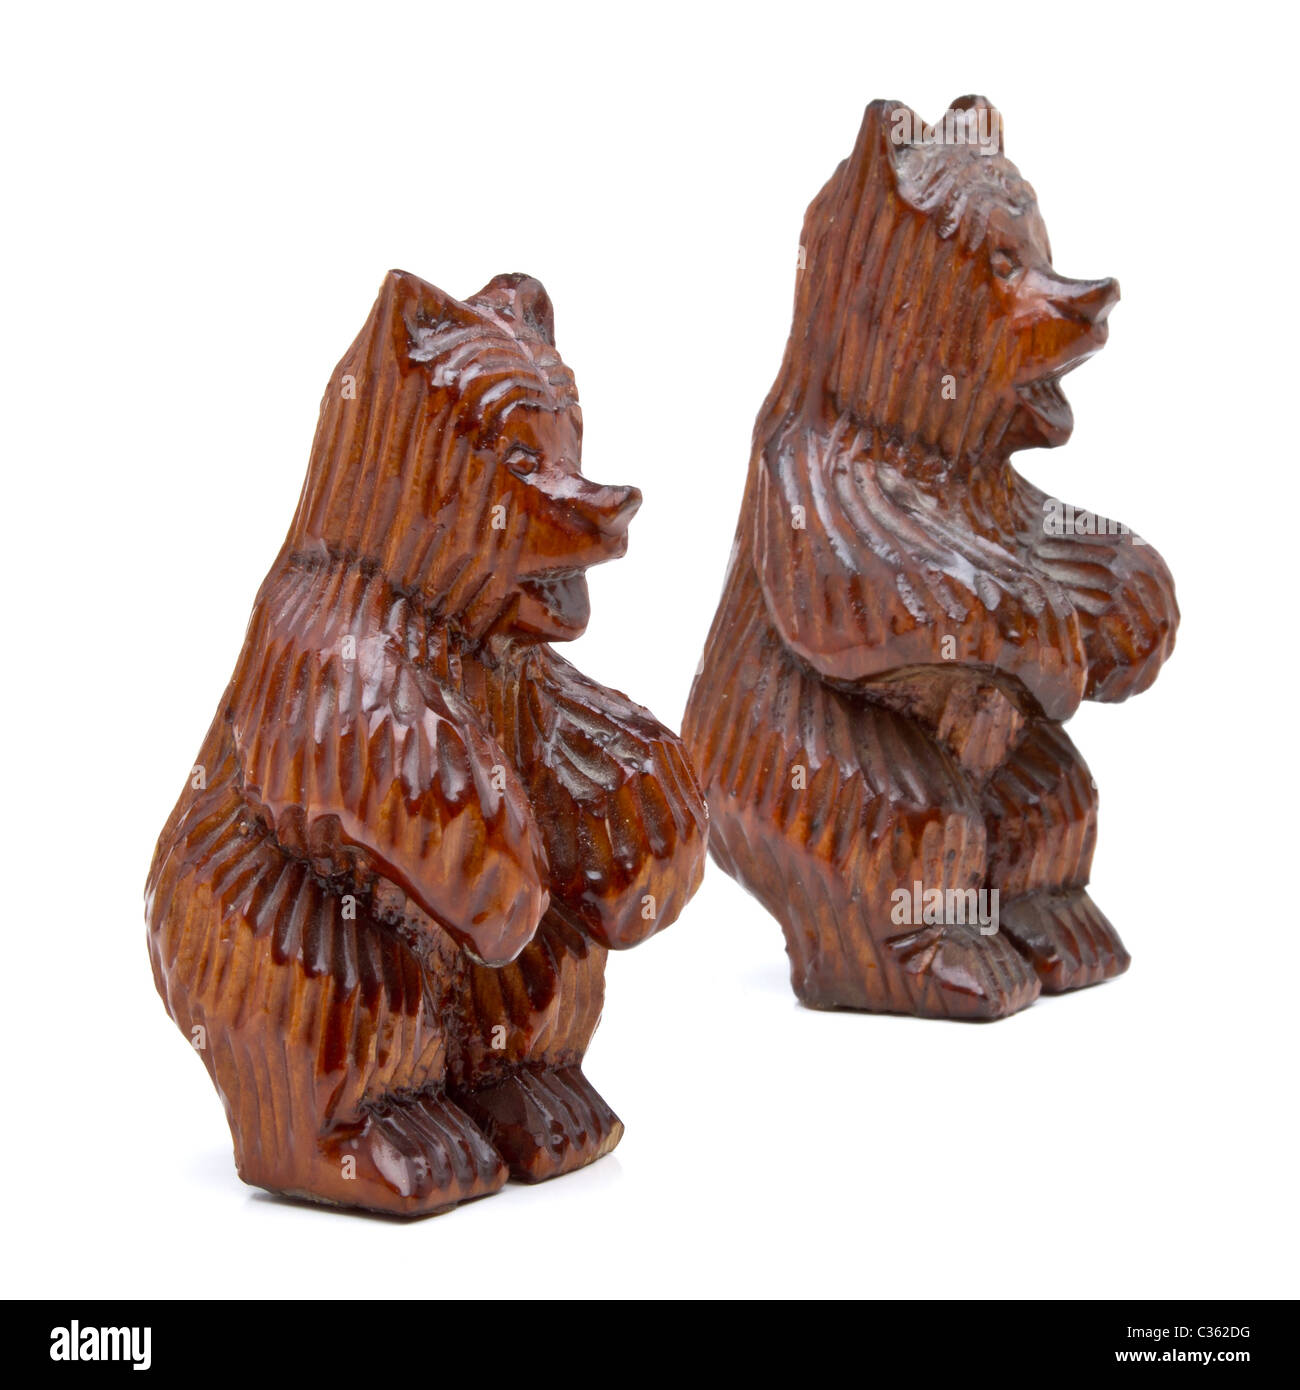 Pair of German black forest carved wooden bears. Stock Photo